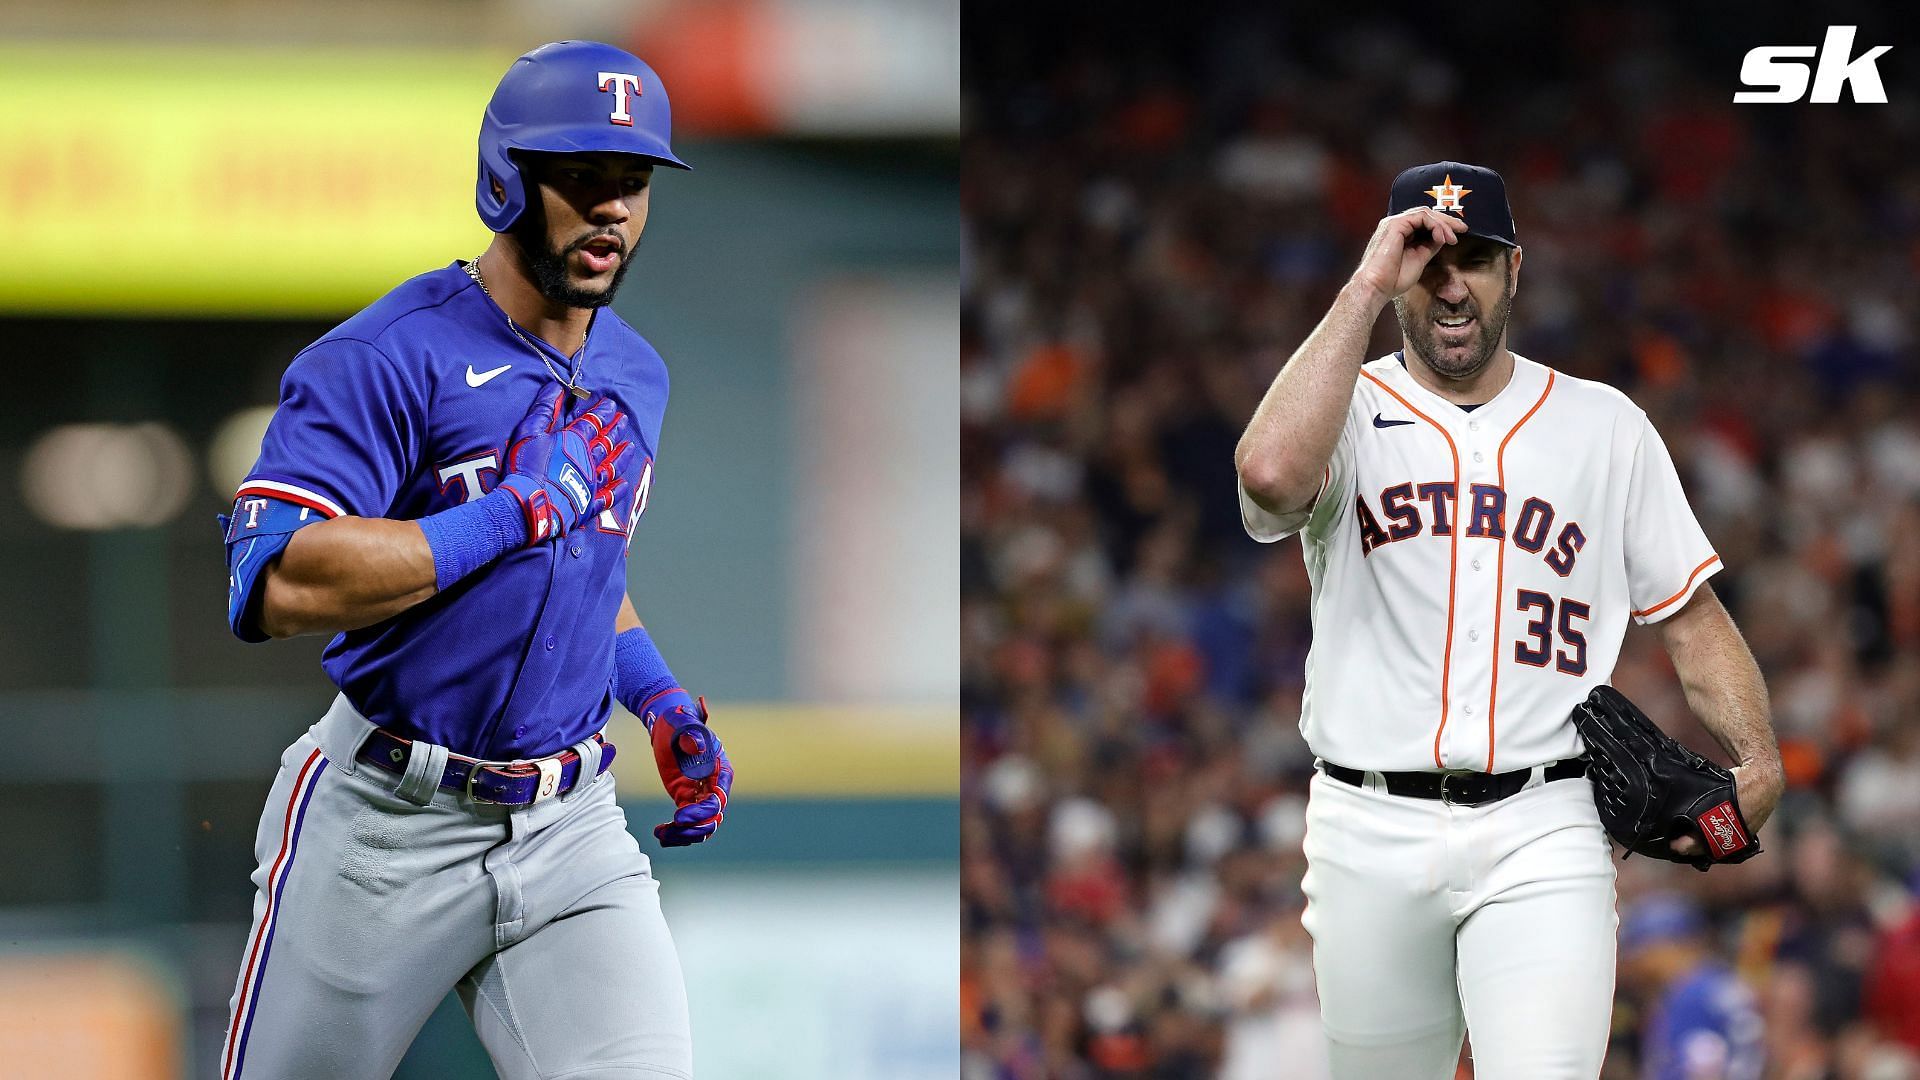 Rangers fans on cloud nine as team takes lead over Astros. 